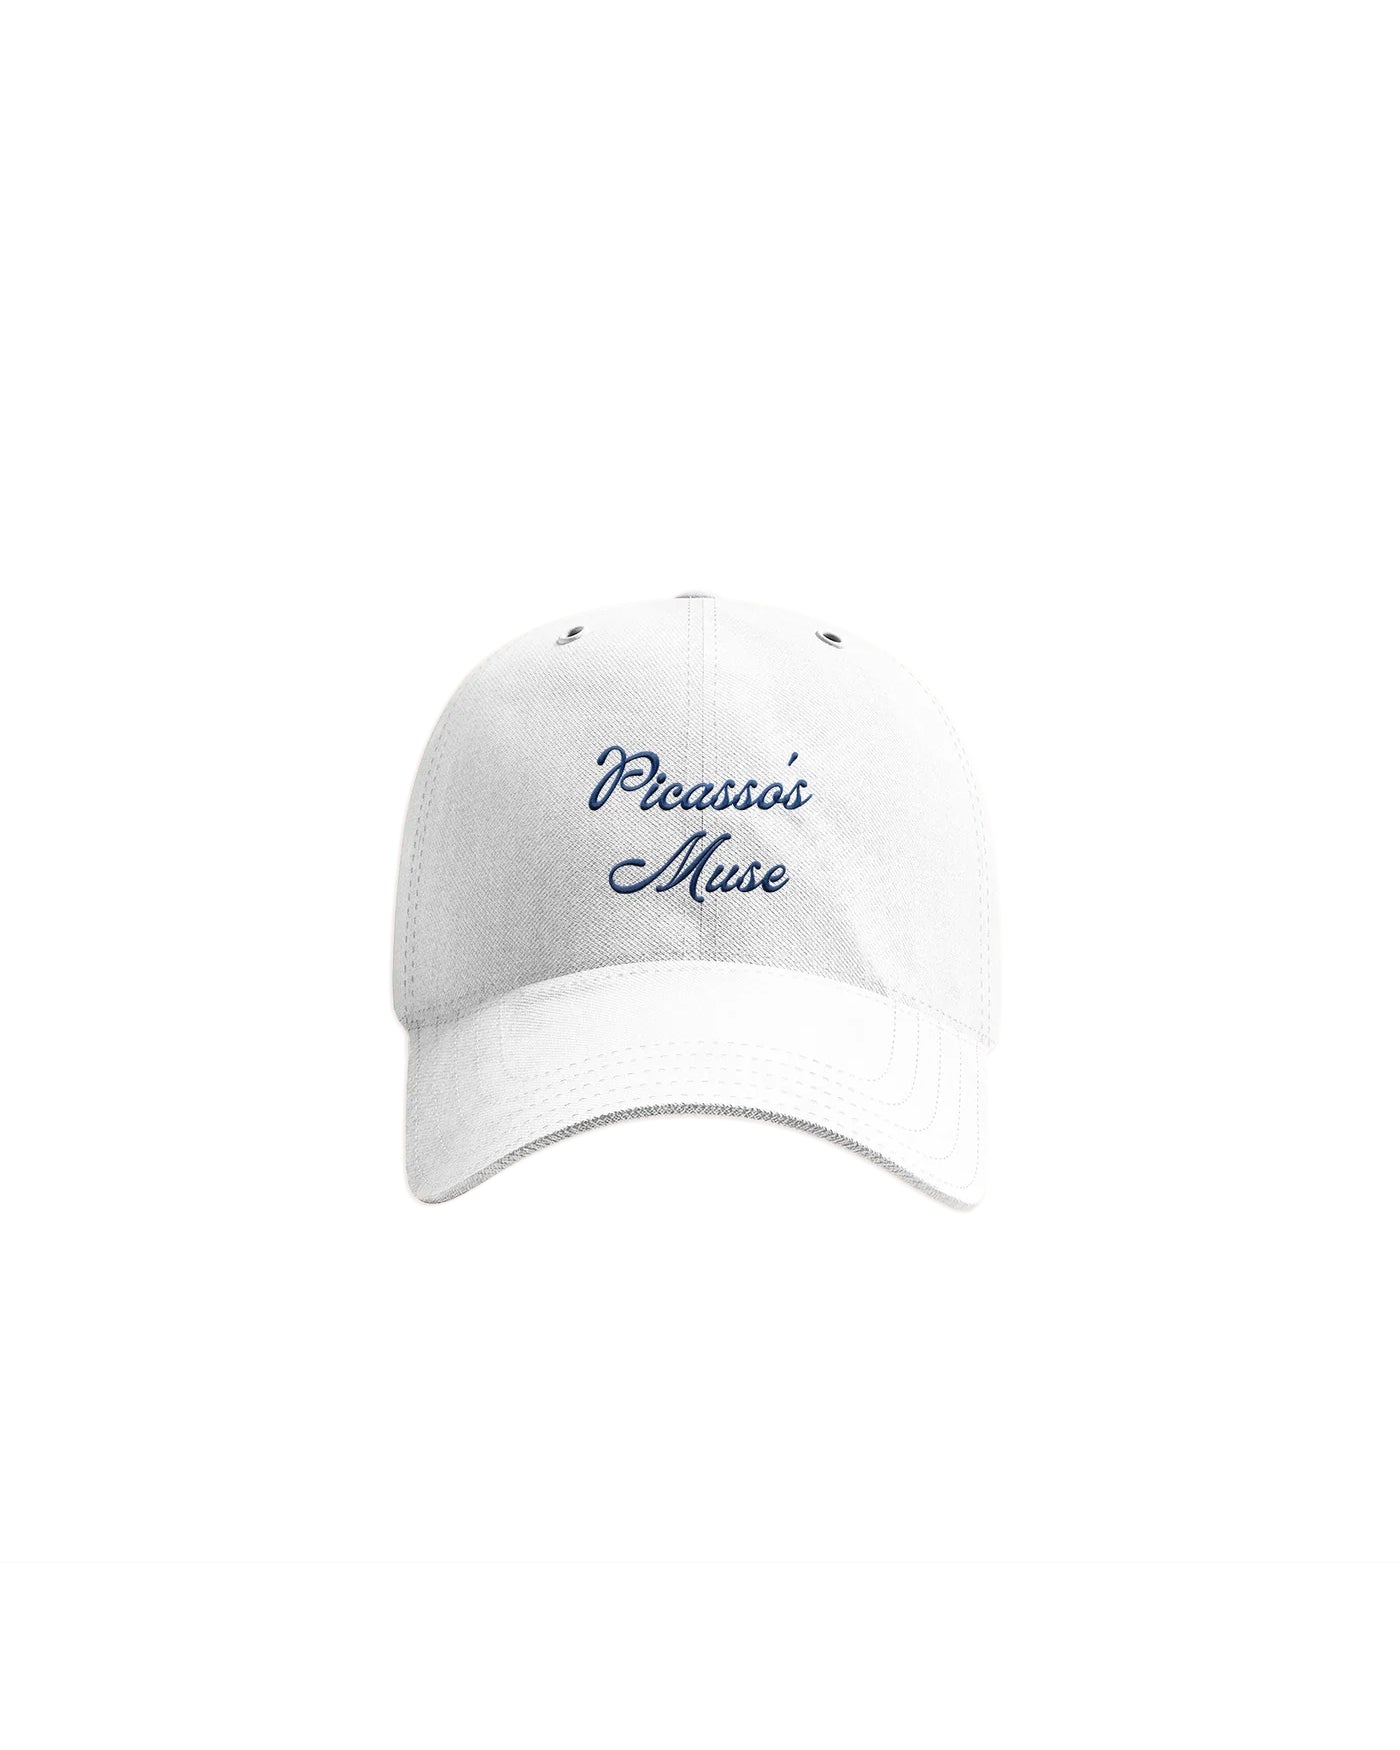 Picasso's Muse Dad Hat